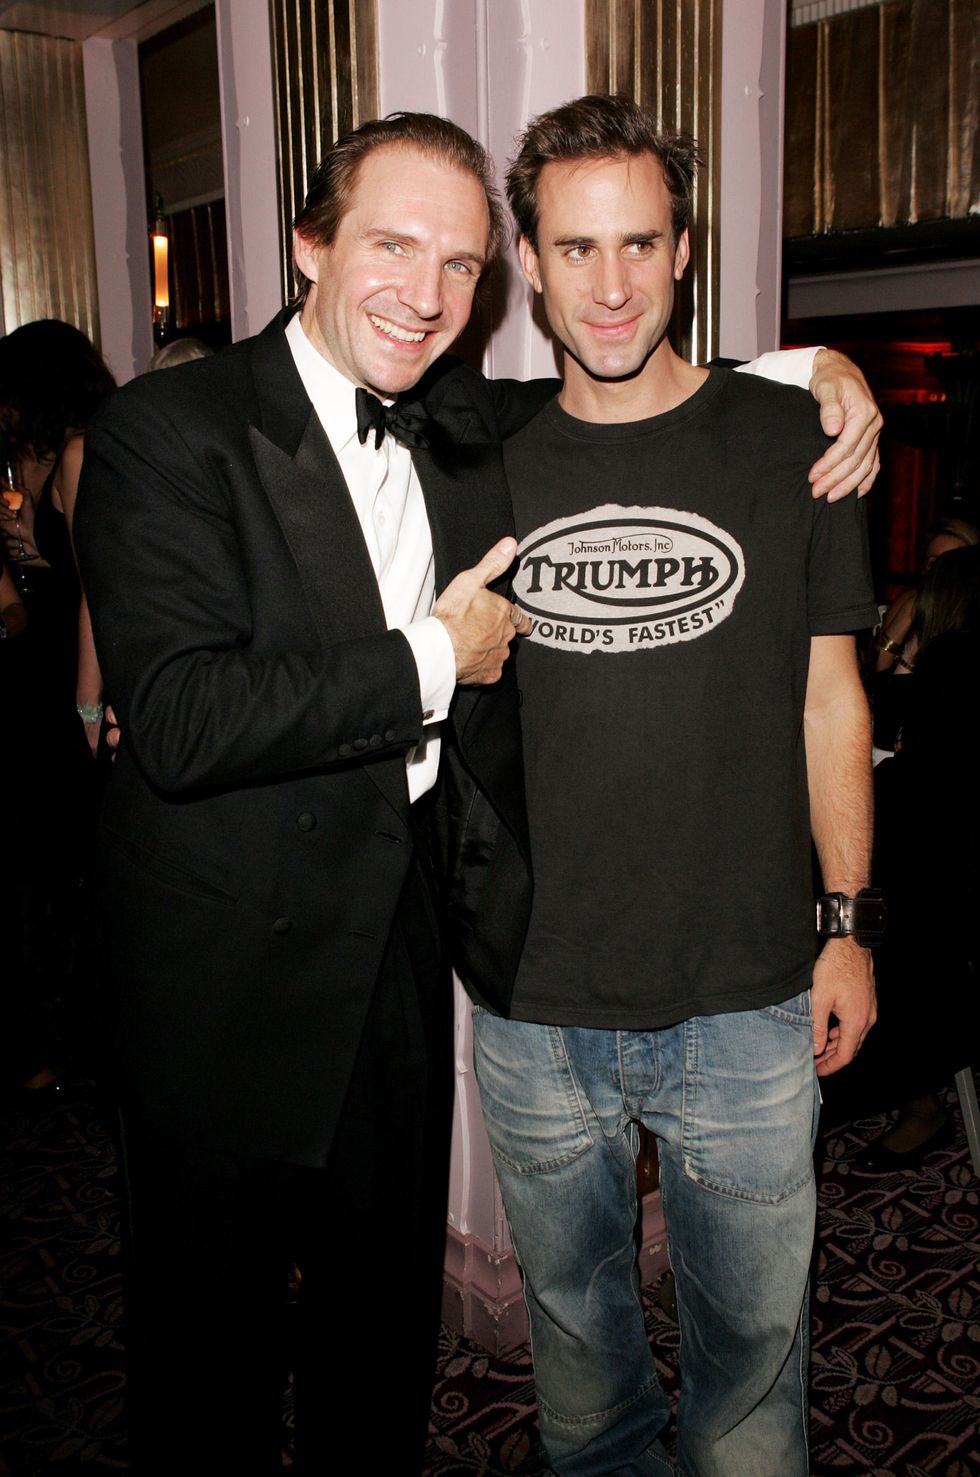 LONDON - OCTOBER 19:  (UK TABLOID NEWSPAPERS OUT)  Actors and brothers Ralph Fiennes (L) and Joseph Fiennes attend the aftershow party following the "The Constant Gardener" Opening Gala for The Times BFI London Film Festival, at the Park Lane Hotel on October 19, 2005 in London, England.  (Photo by Claire Greenway/Getty Images)